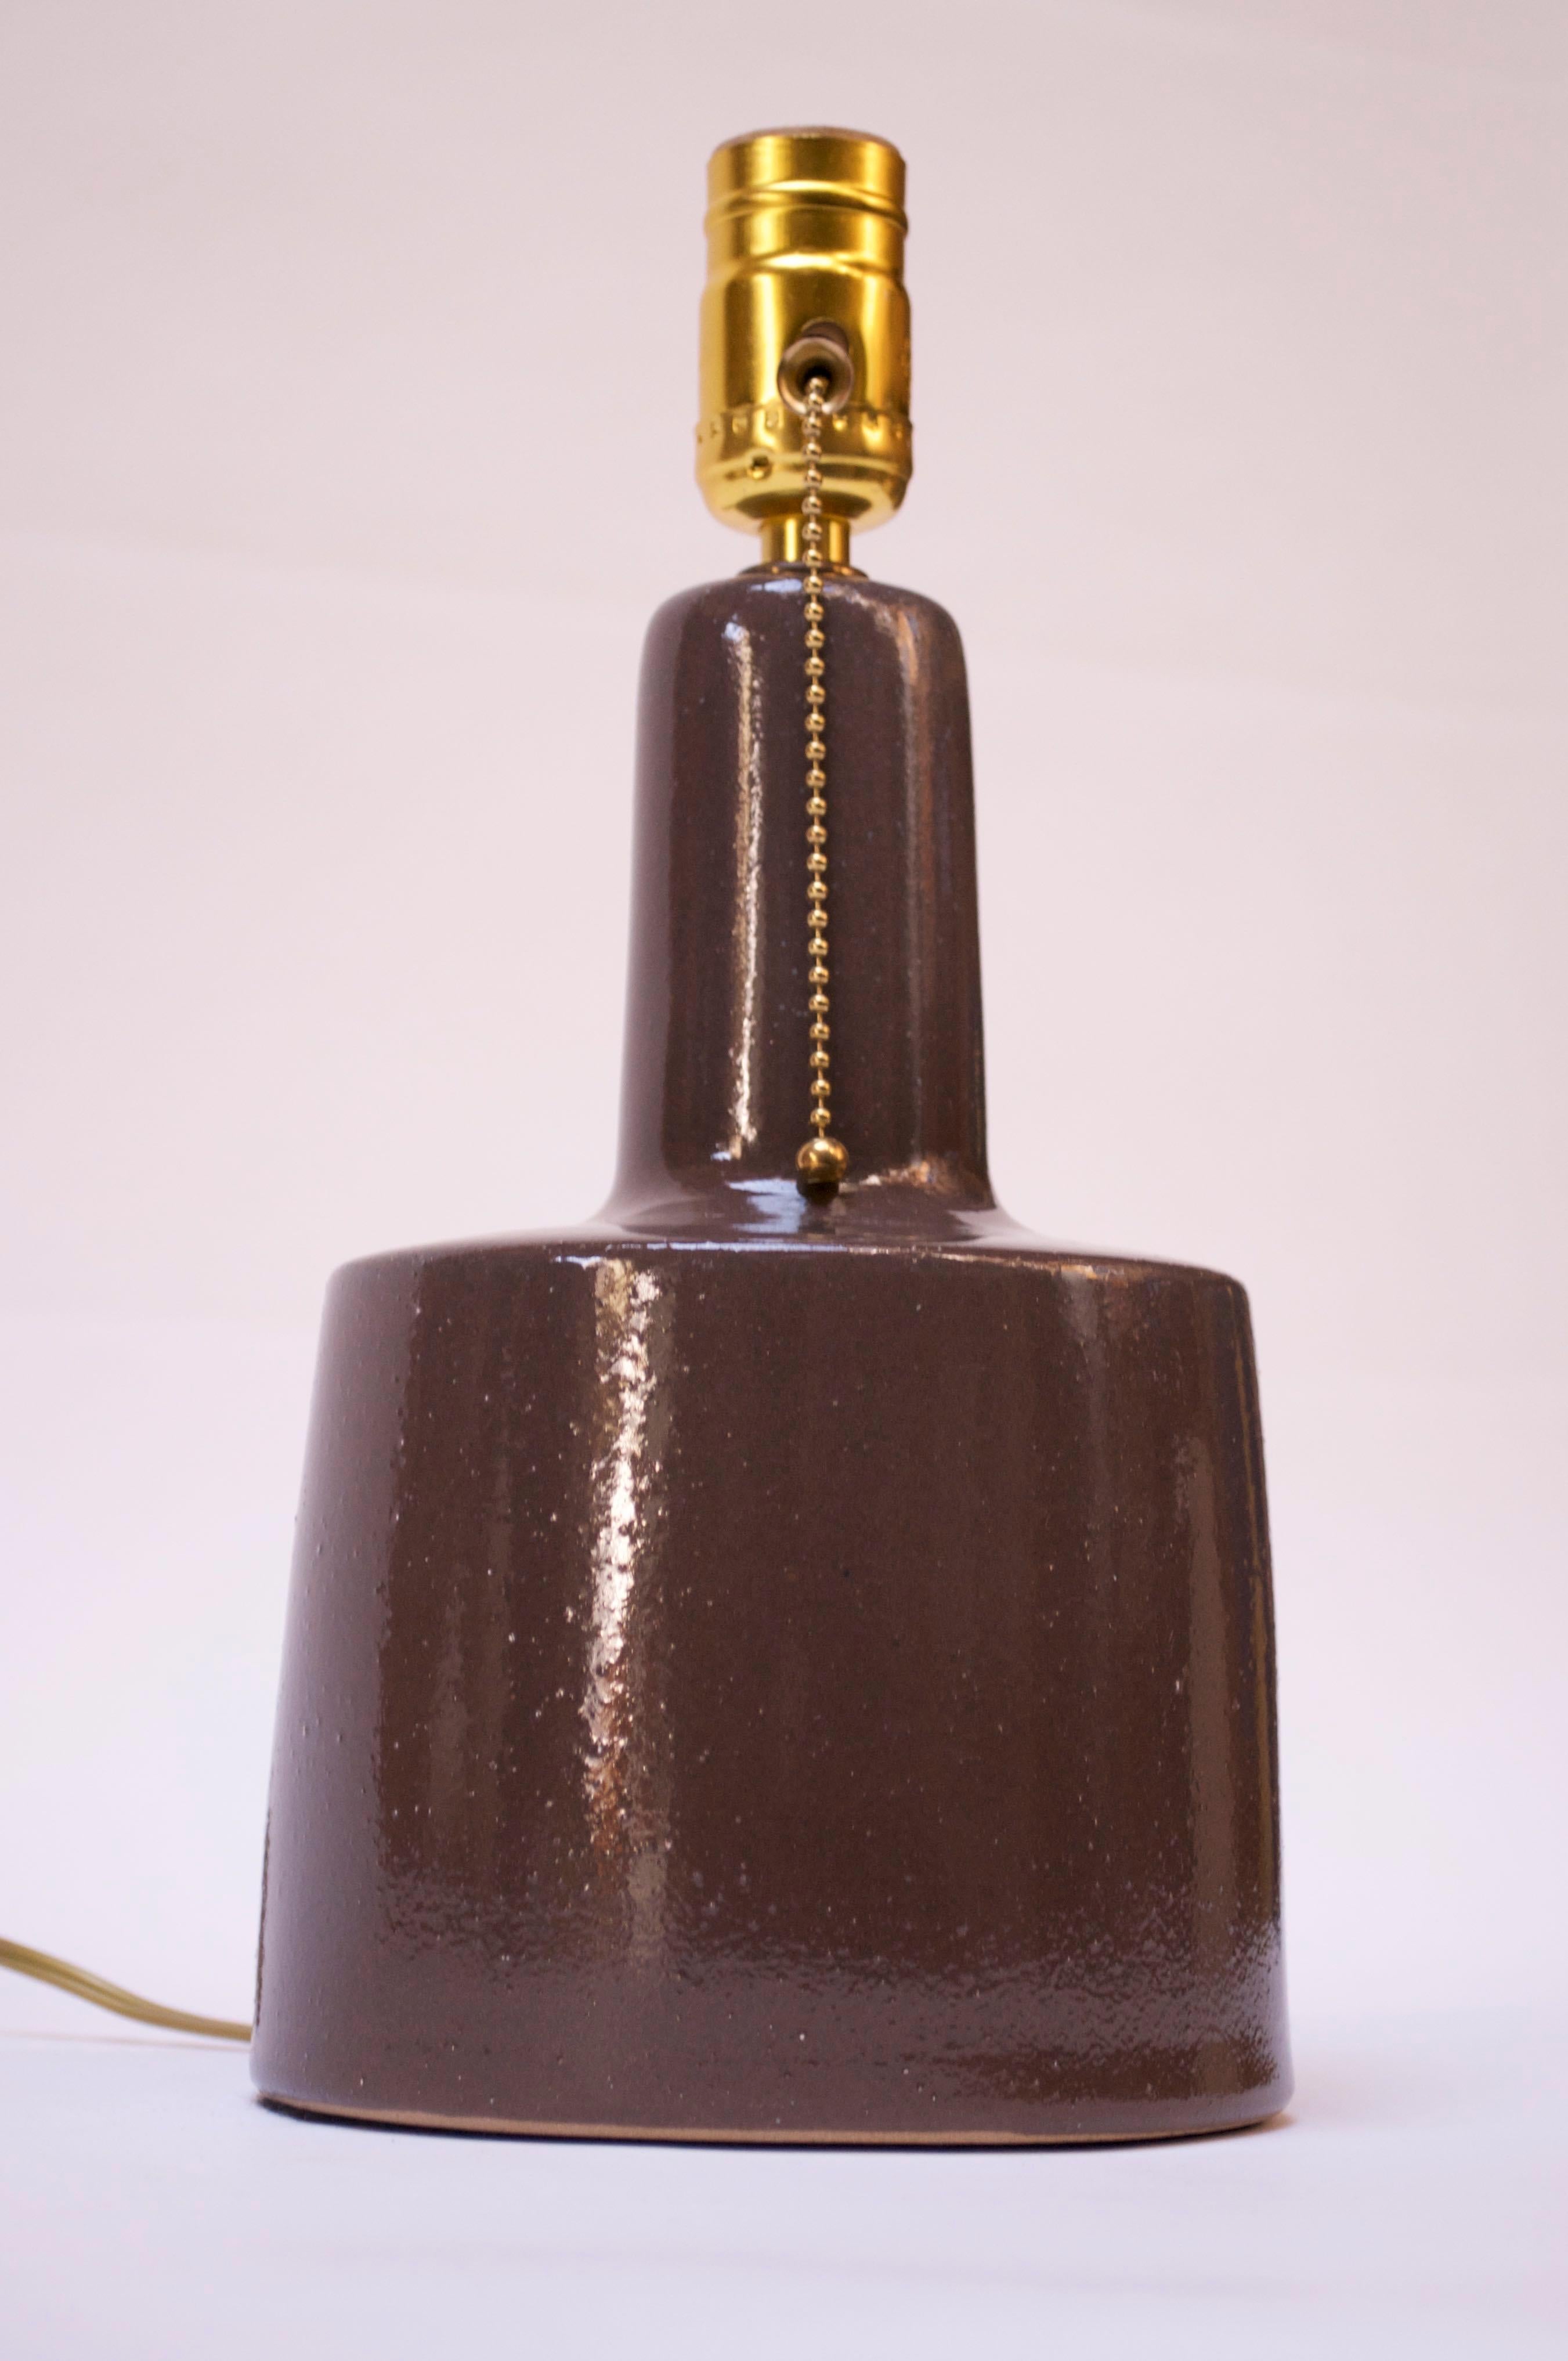 This petite, ceramic table lamp was designed by Gordon and Jane Martz for Marshall Studios in the 1960s. It is a high-gloss chocolate finish (which actually appears charcoal depending on the light / angle) with a highly textured, mottled surface.